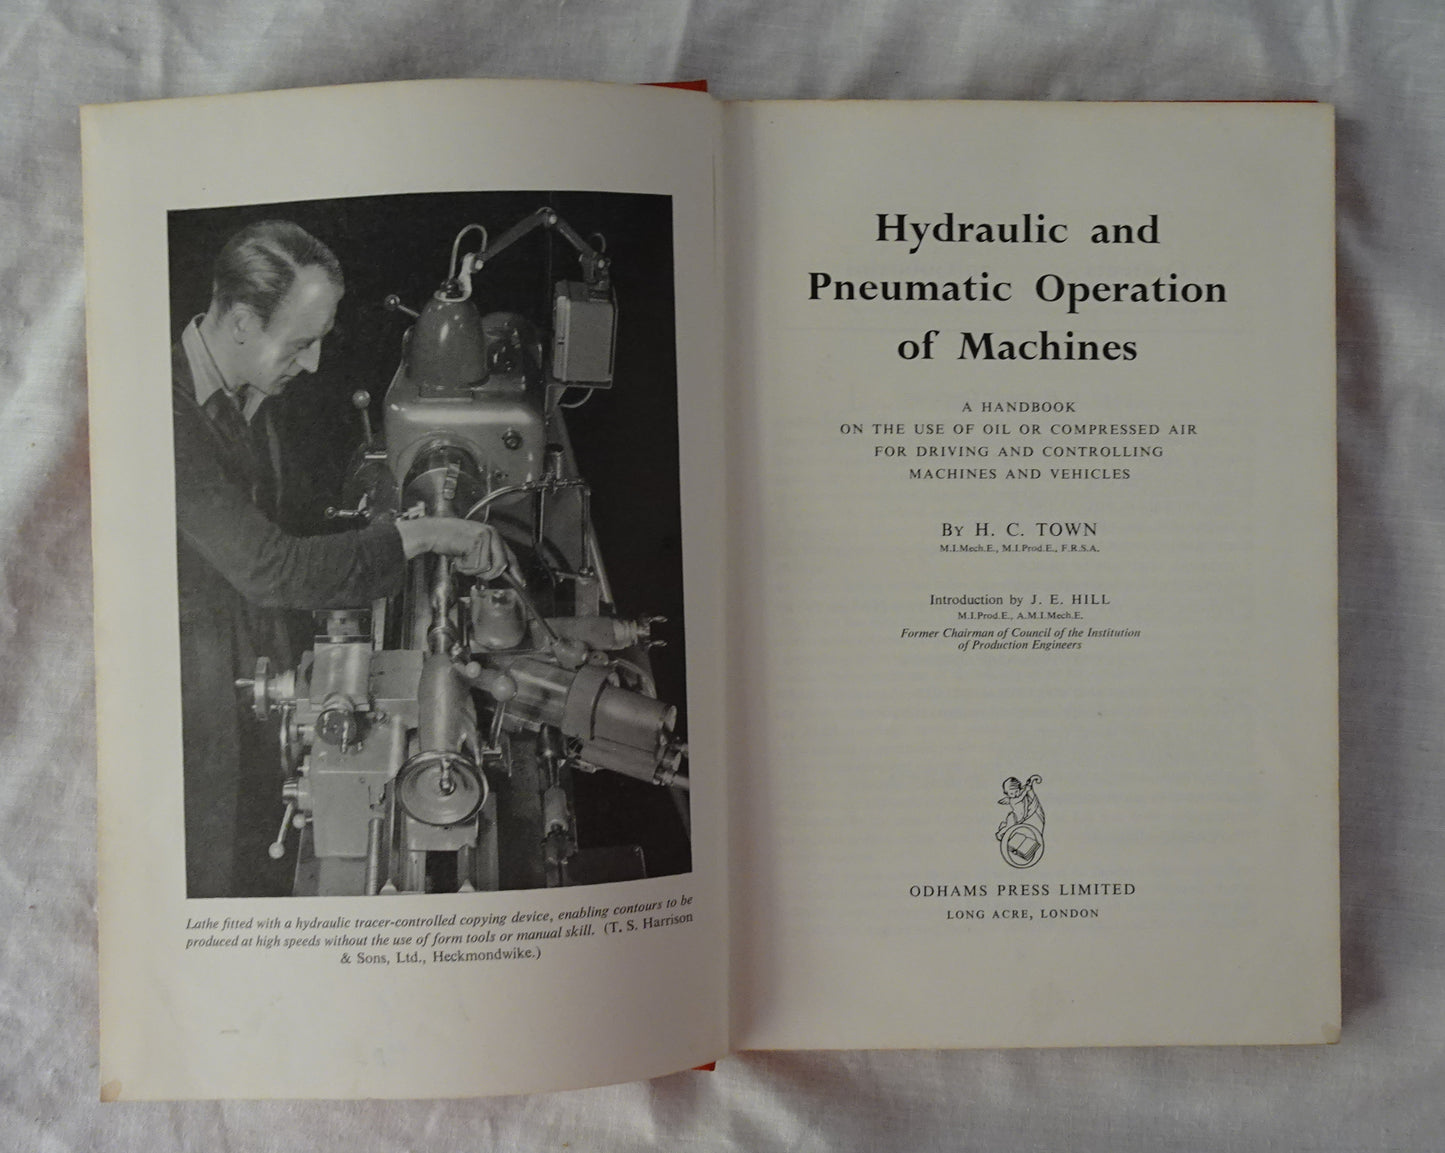 Hydraulic and Pneumatic Operation of Machines by H. C. Town